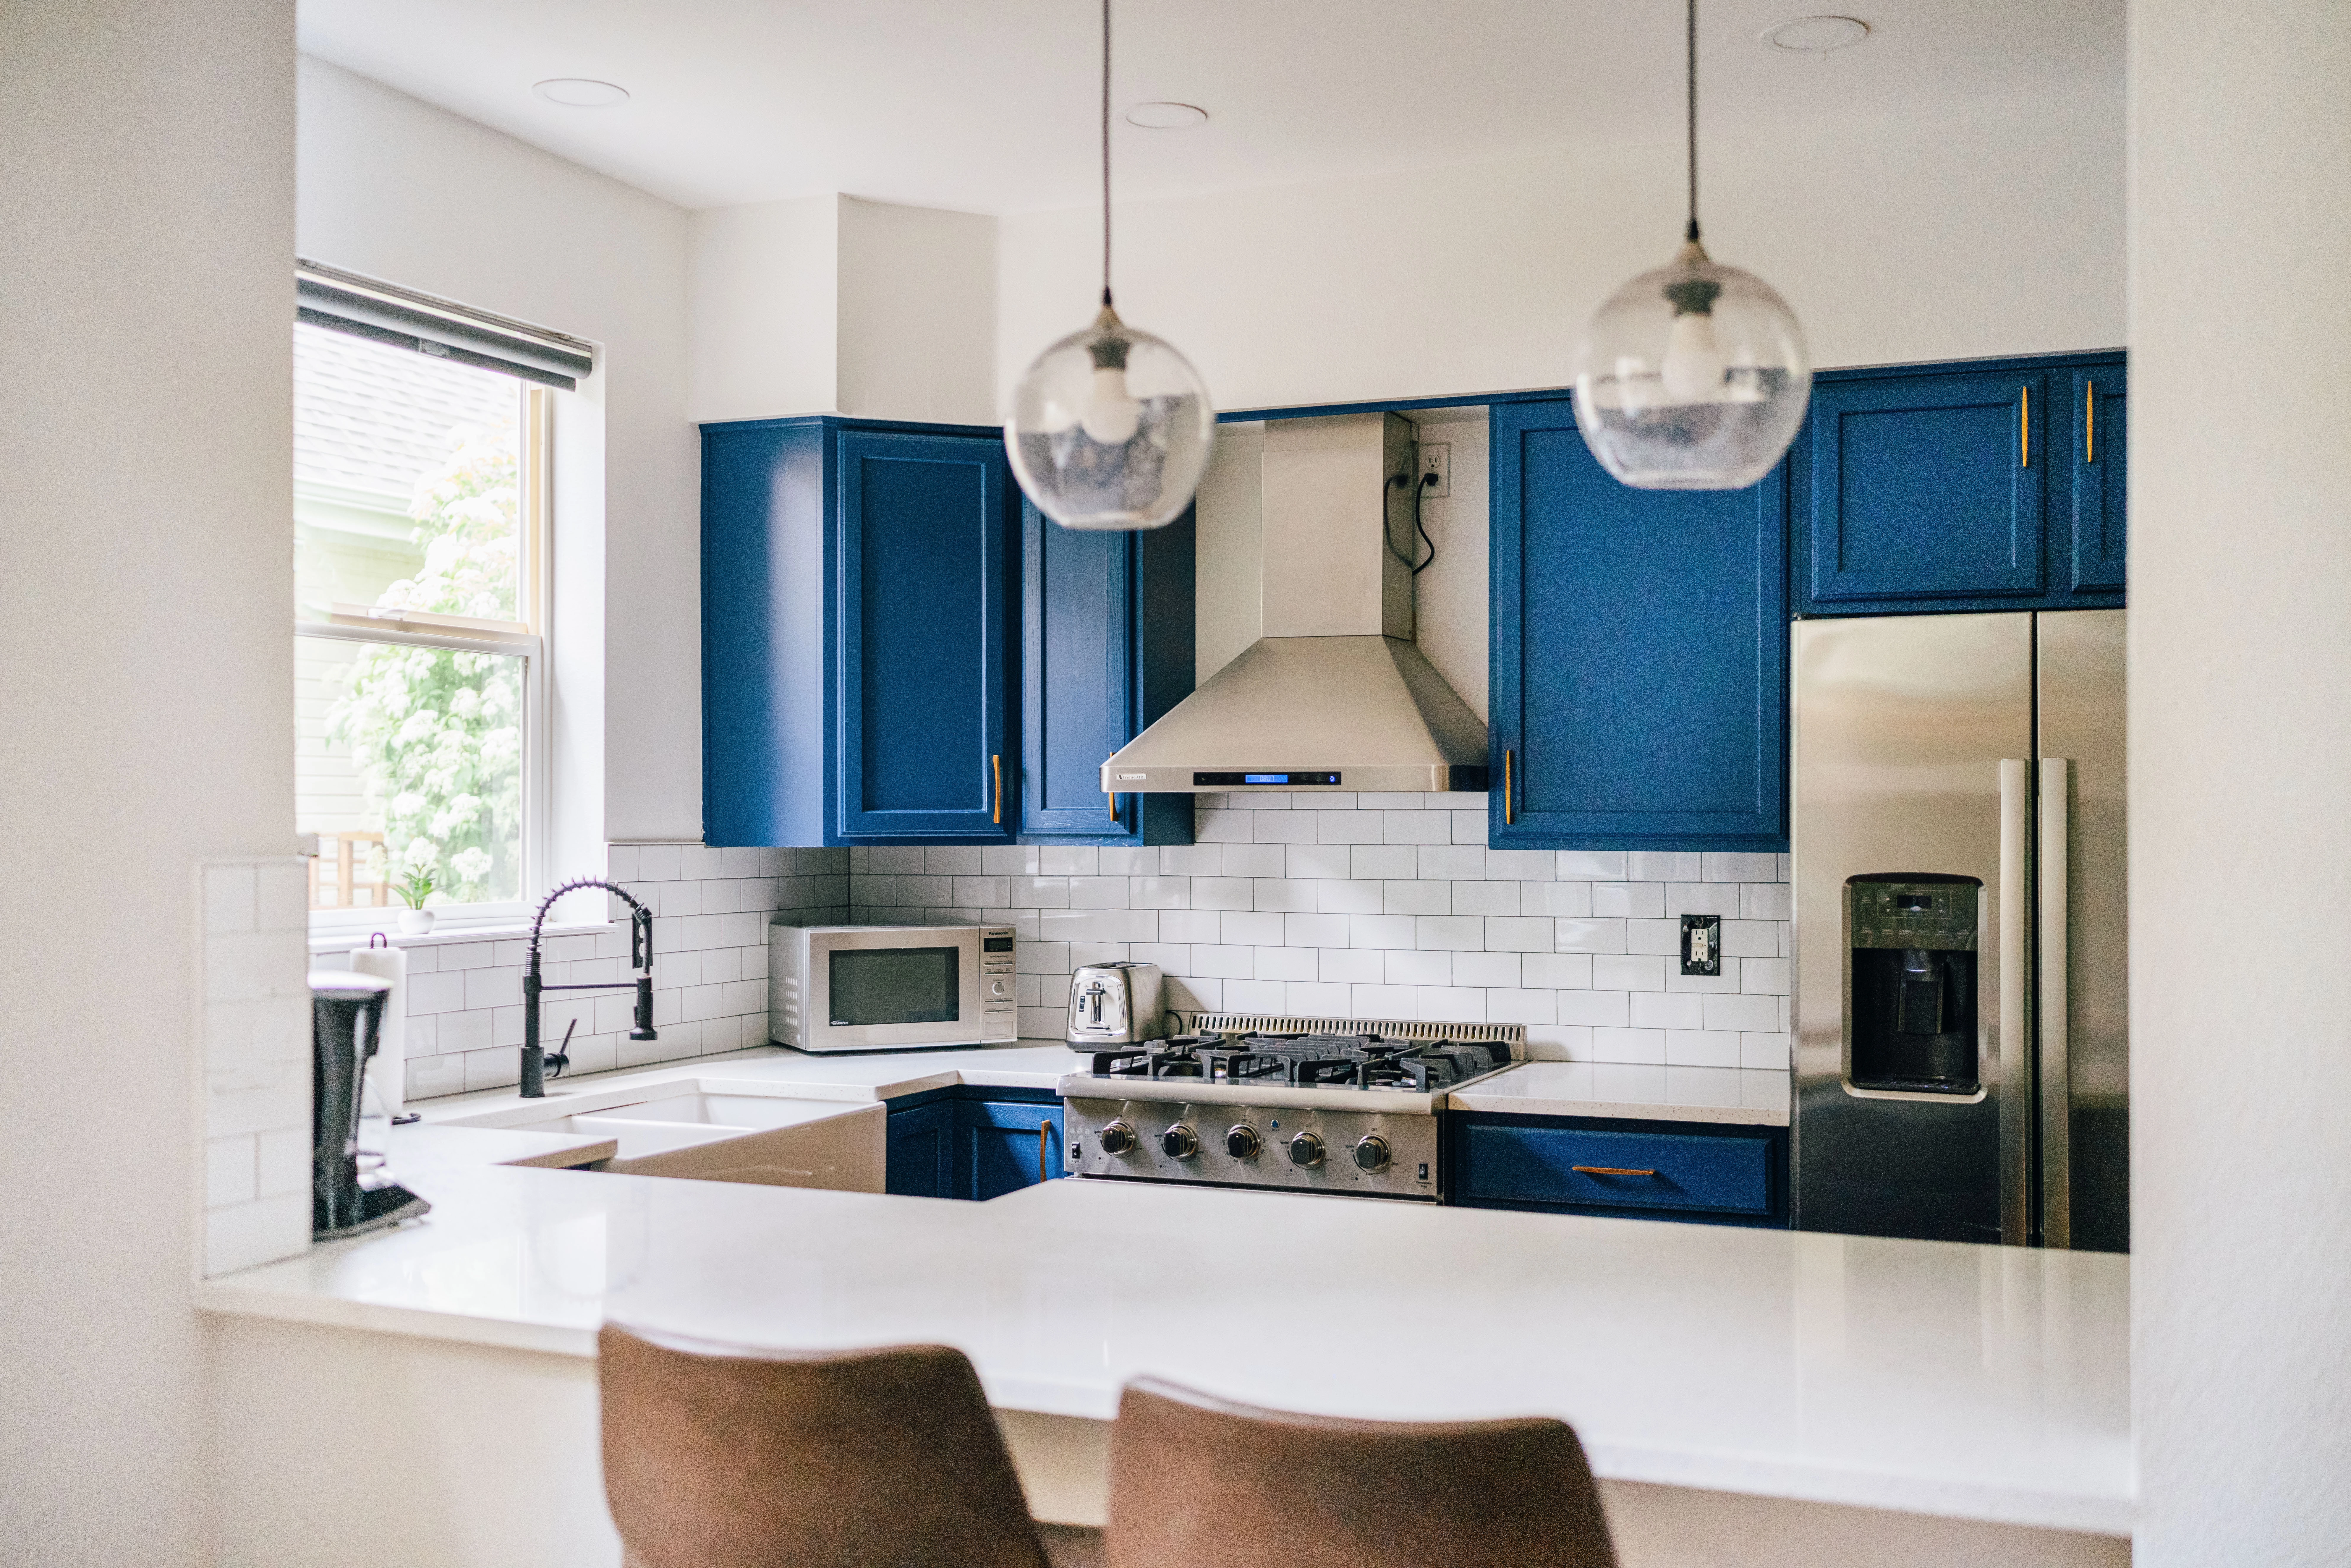 Modern farmhouse kitchen with open bar, white walls and backsplash, and blue cobalt cabinets.